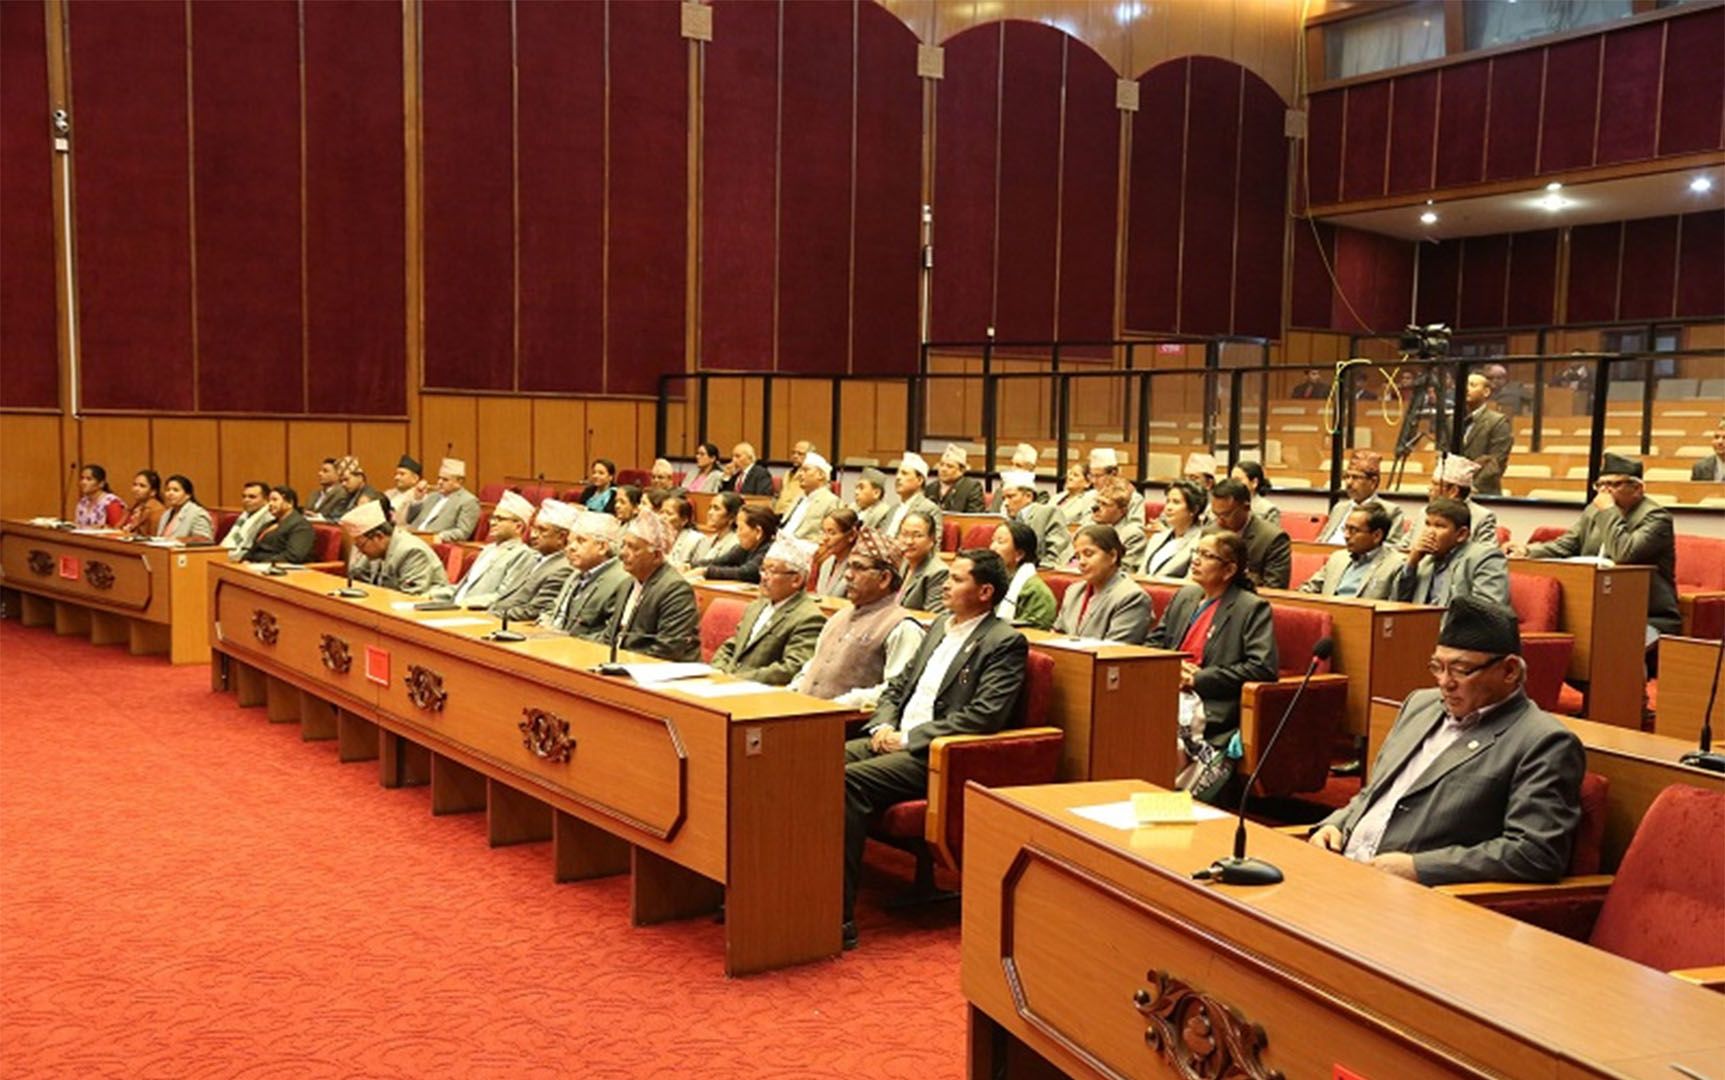 'Appropriation Bill 2077' has been approved in the House of Representatives